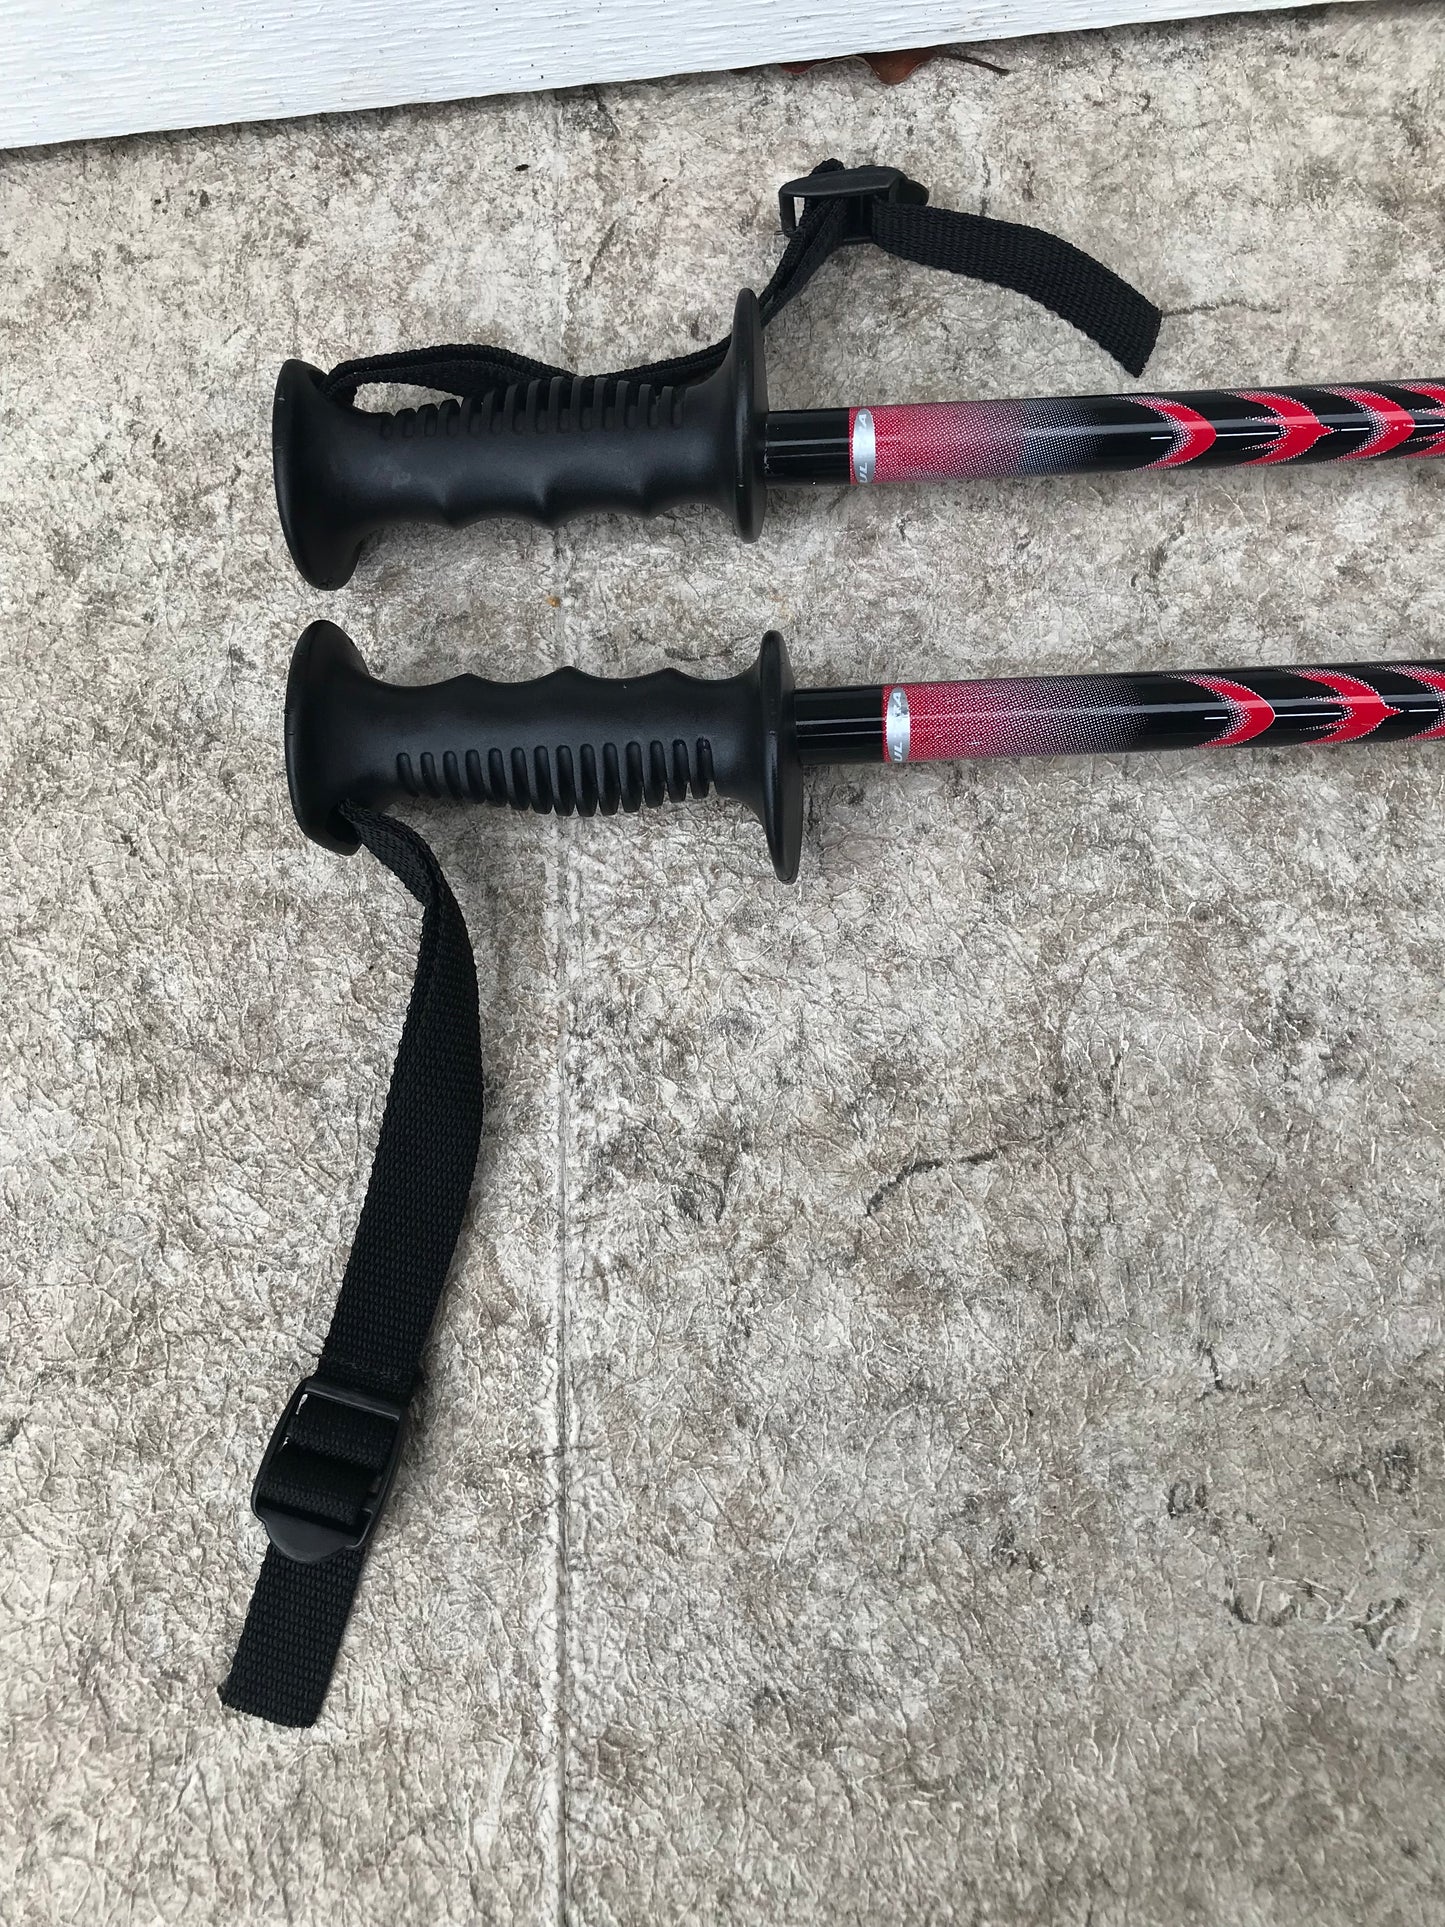 Ski Poles 50 inch 125 cm Ultra Black Red Yellow Excellent